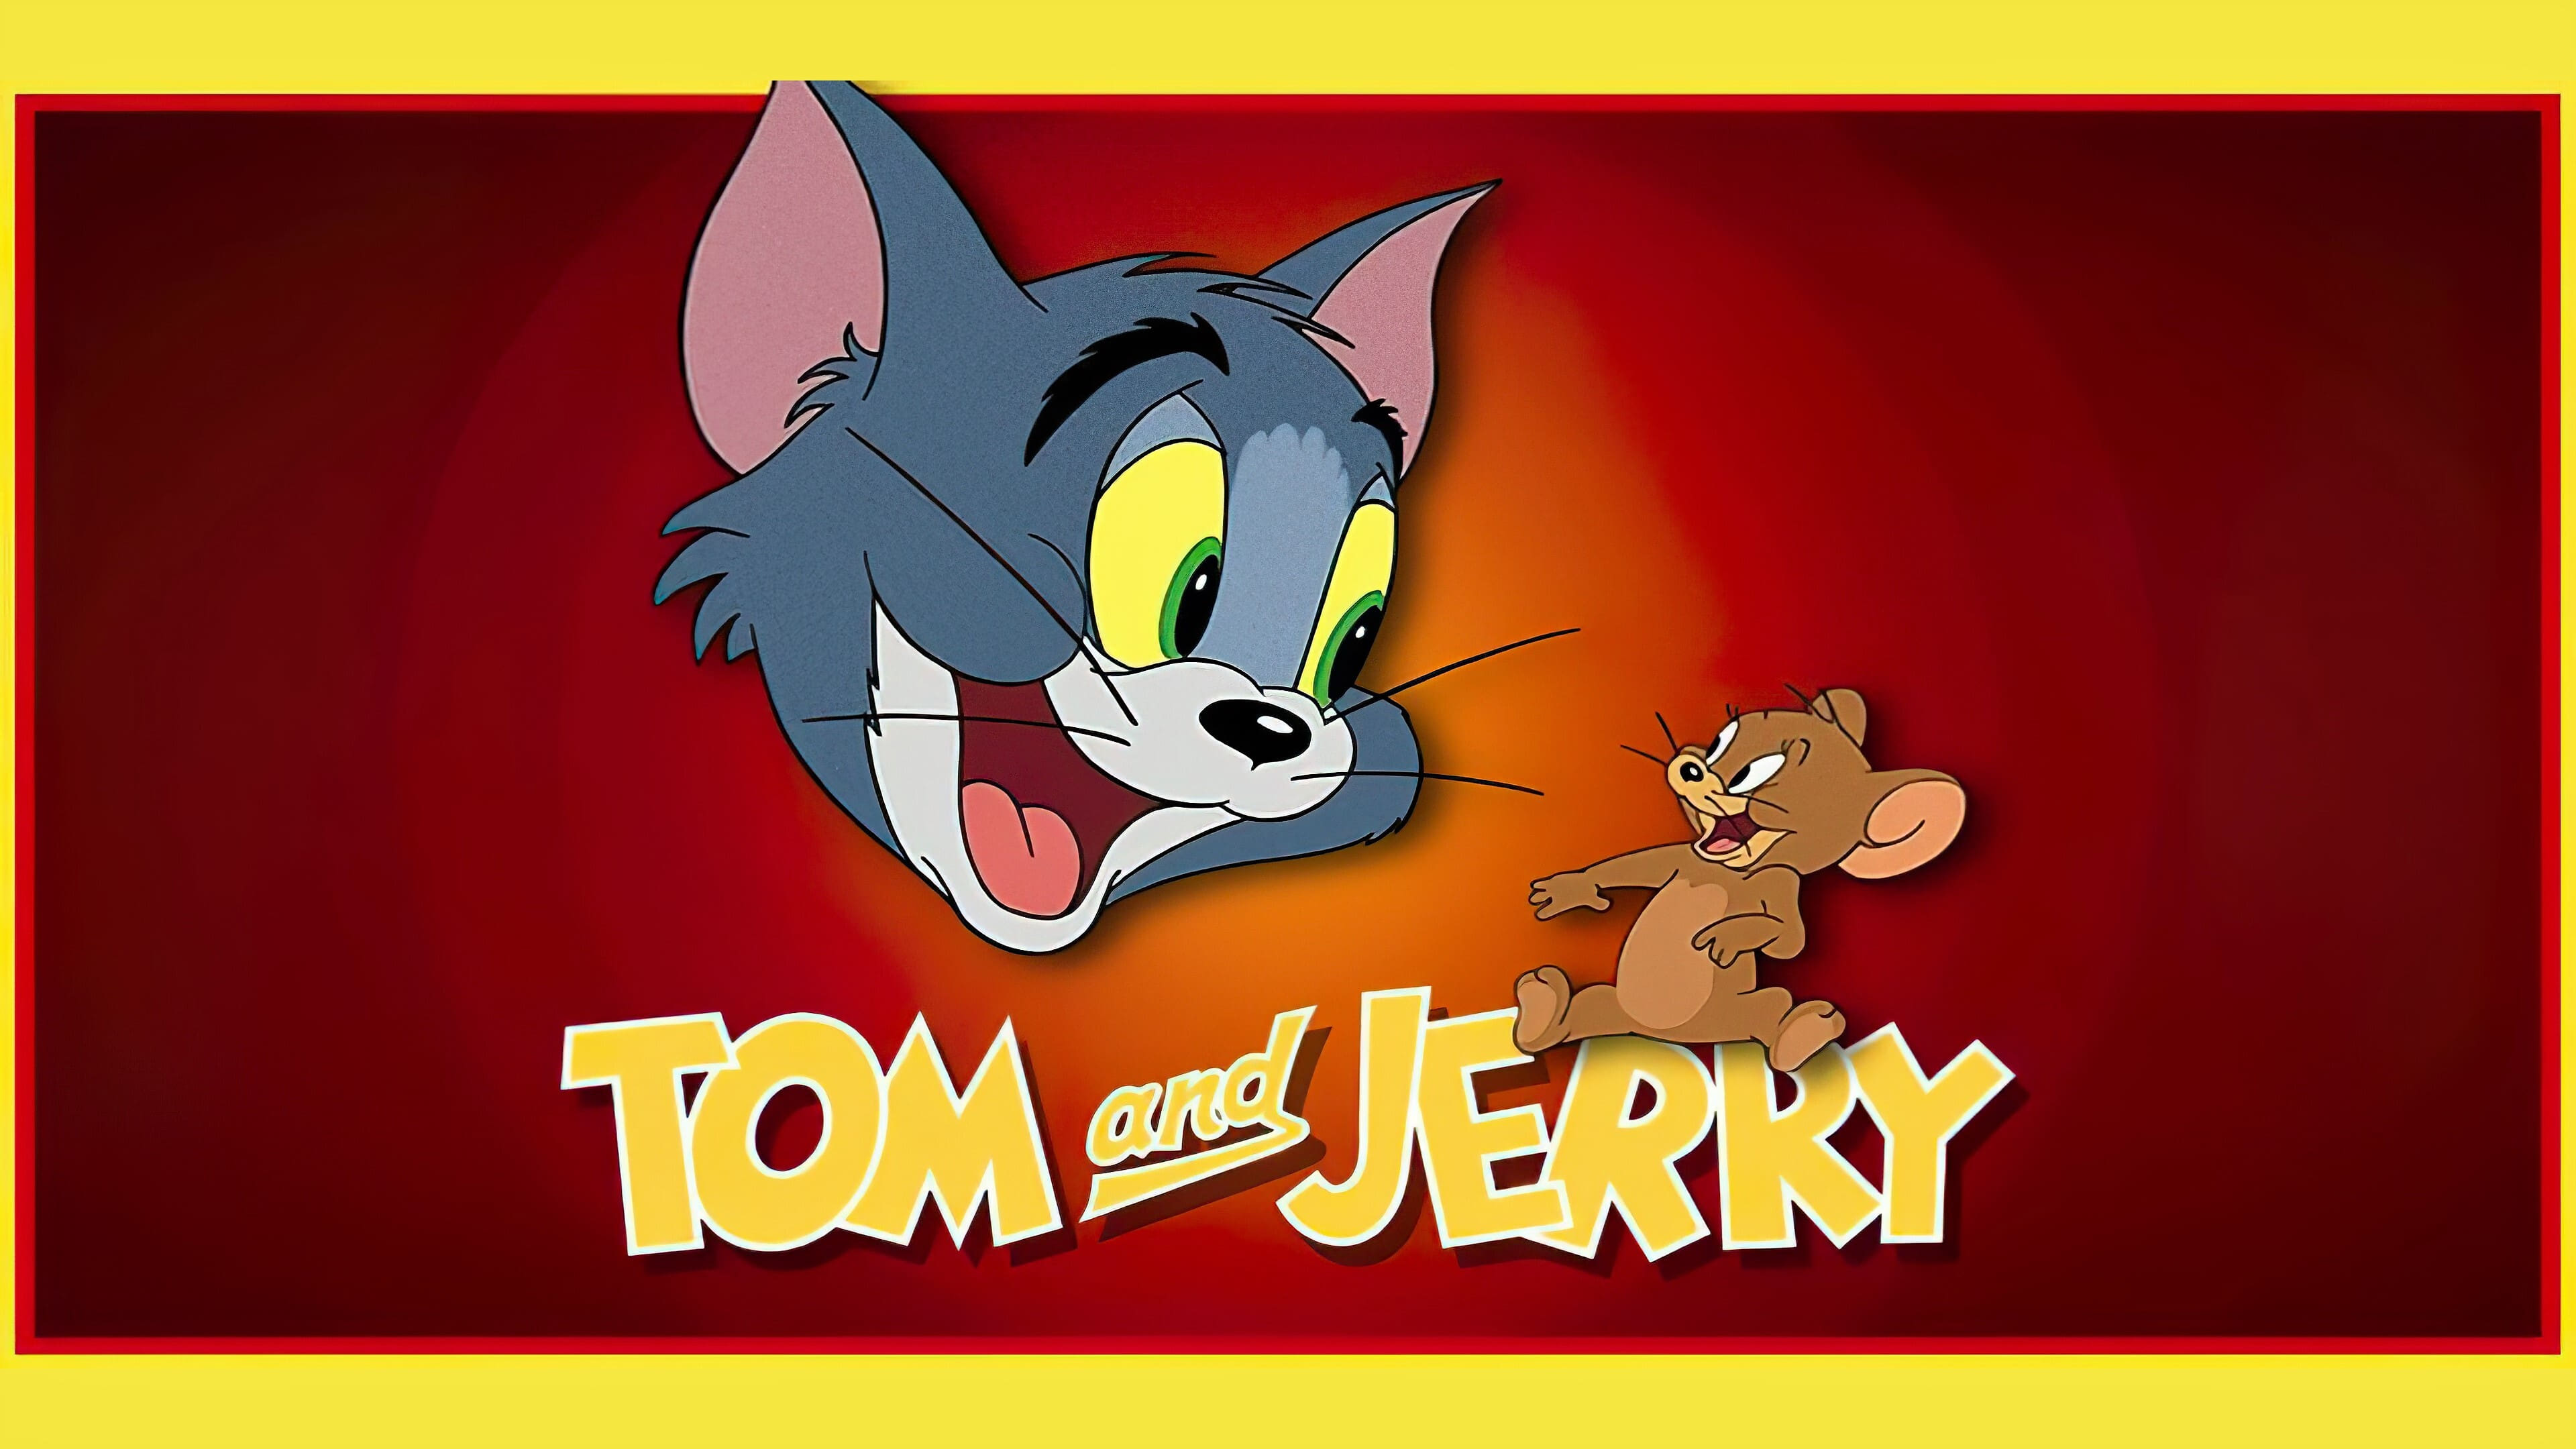 Tom & Jerry - Full Movie Download/Watch in HD Free | Flixhub